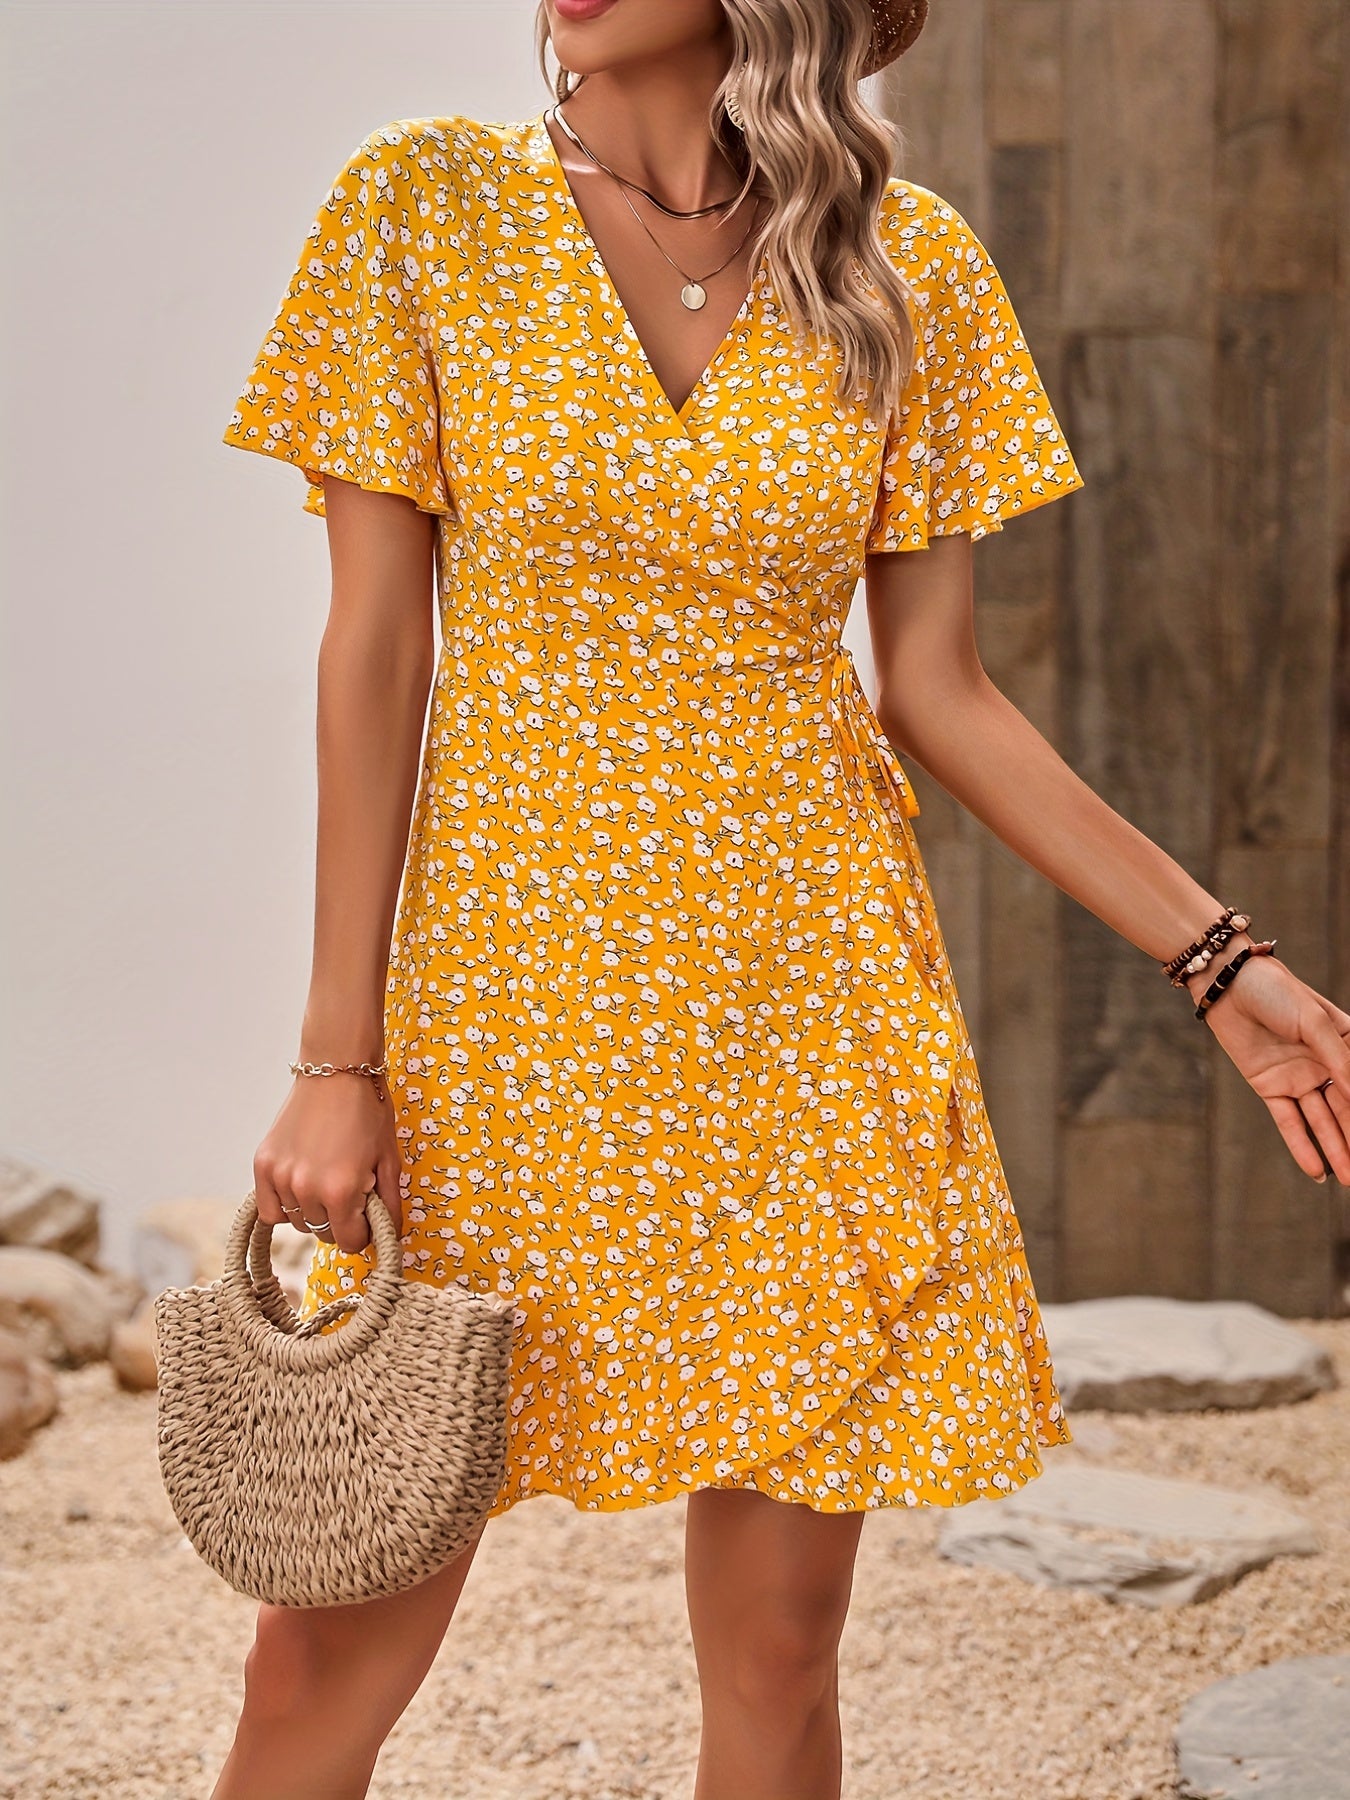 「lovevop」Ditsy Floral Print Dress, Vacation Knotted V Neck Short Sleeve Summer Dress, Women's Clothing